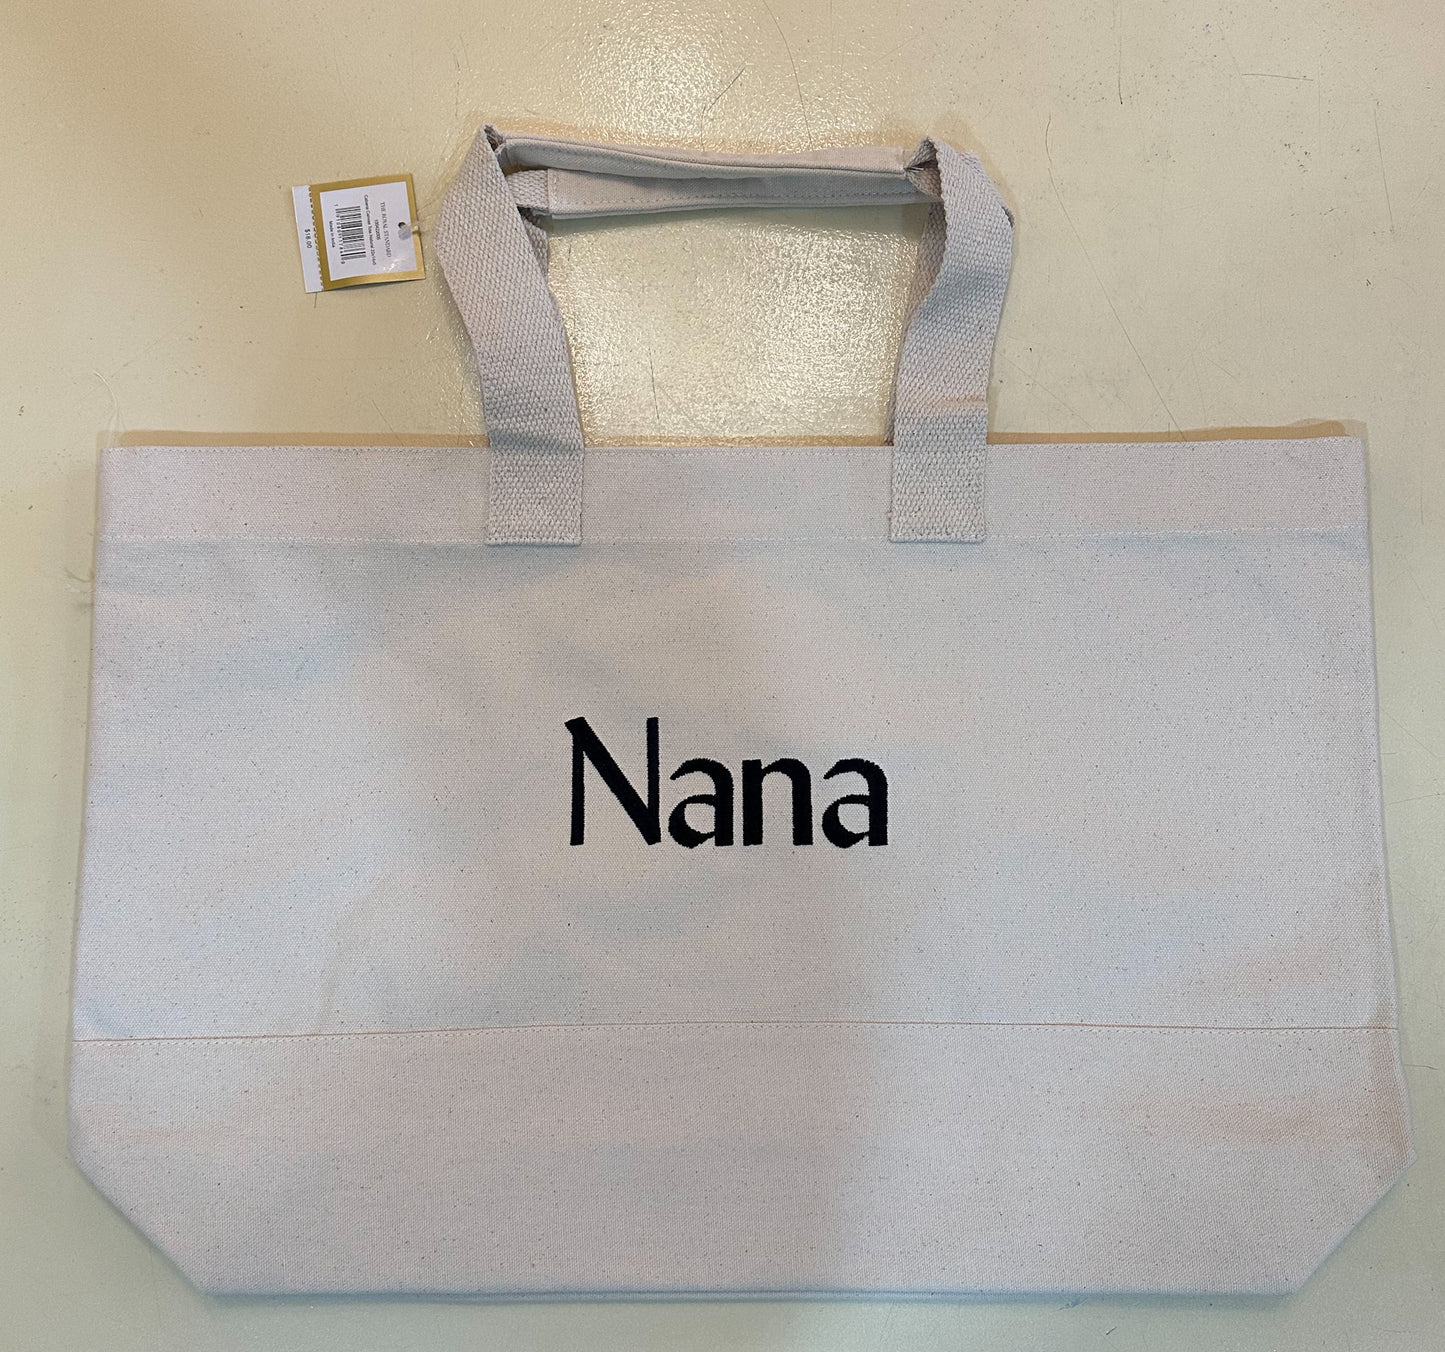 Large Canvas Totes